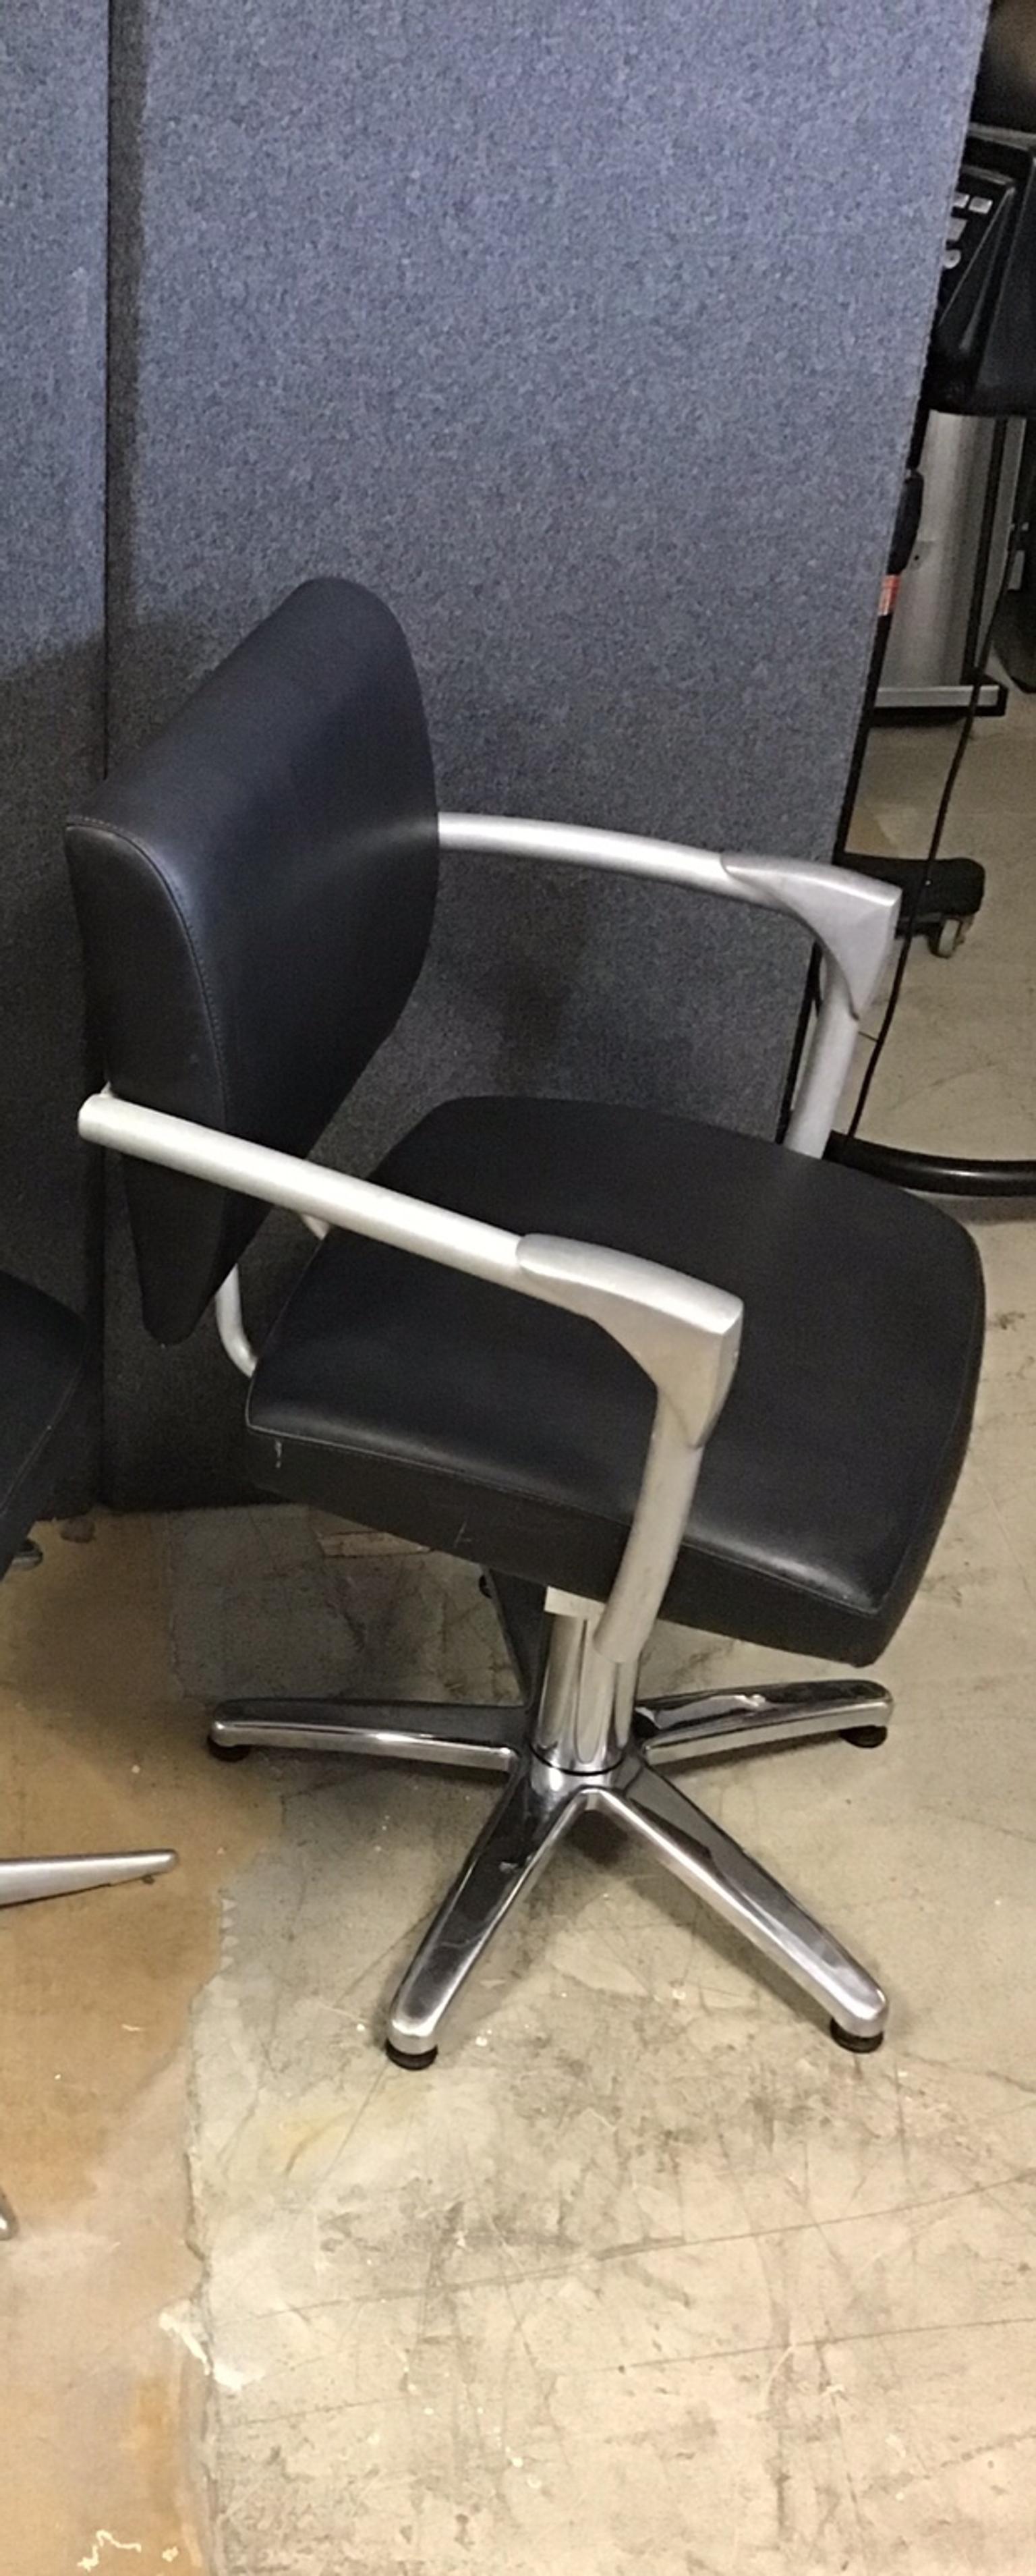 Hydraulic Styling Chairs Barber Chairs In Cv1 Coventry For 80 00